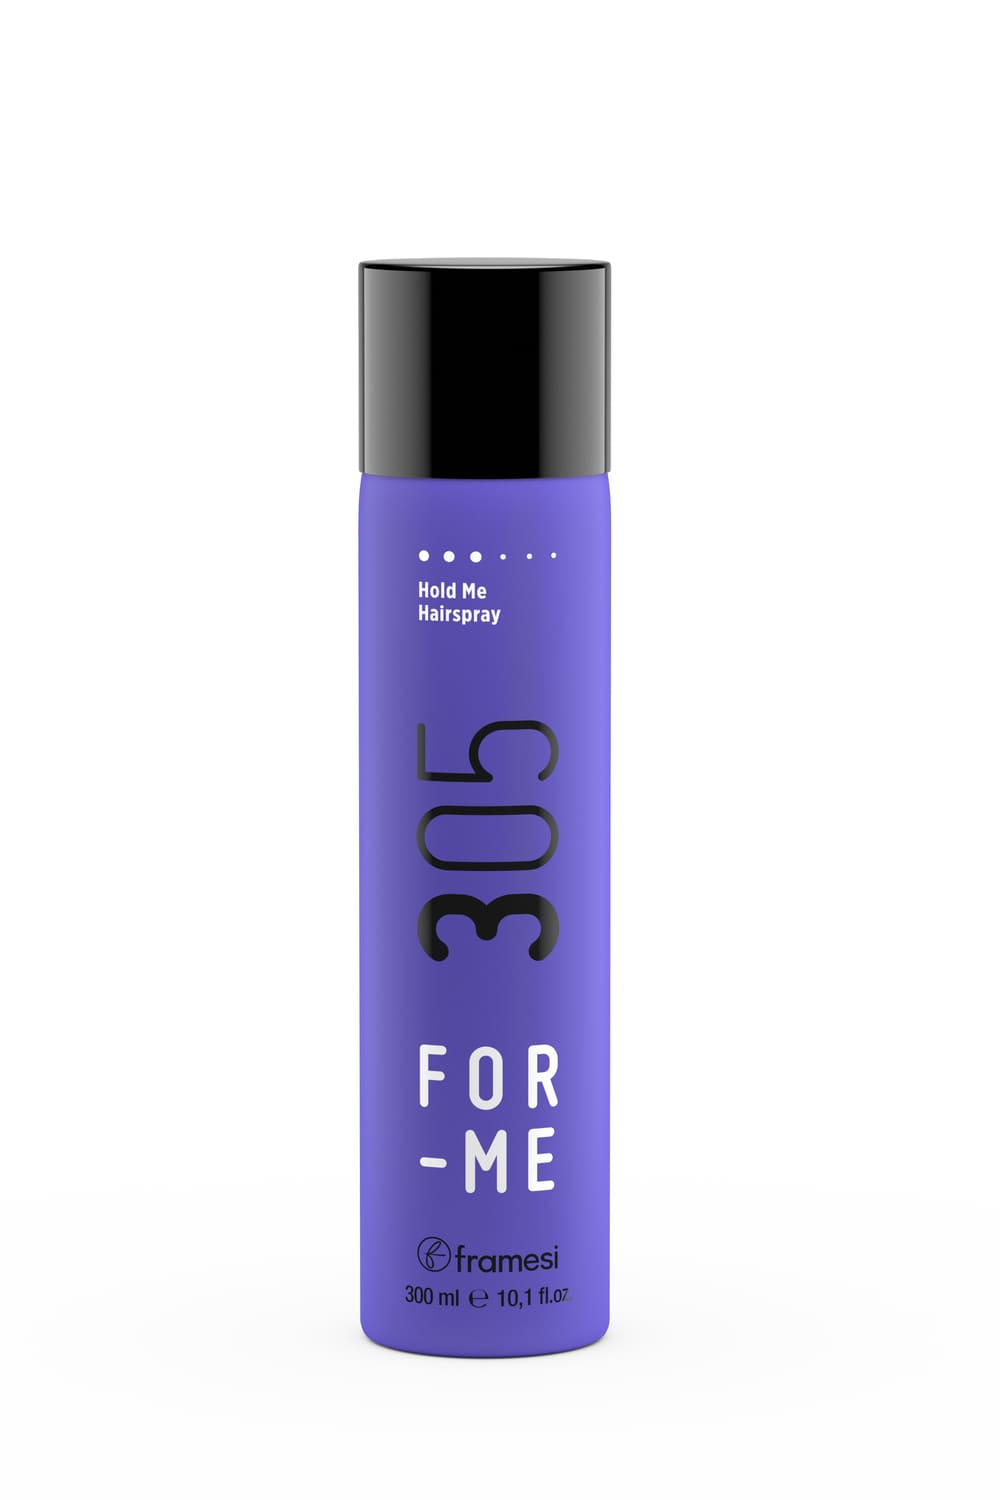 FOR ME_305_HOLD ME HAIRSPRAY_300 ML